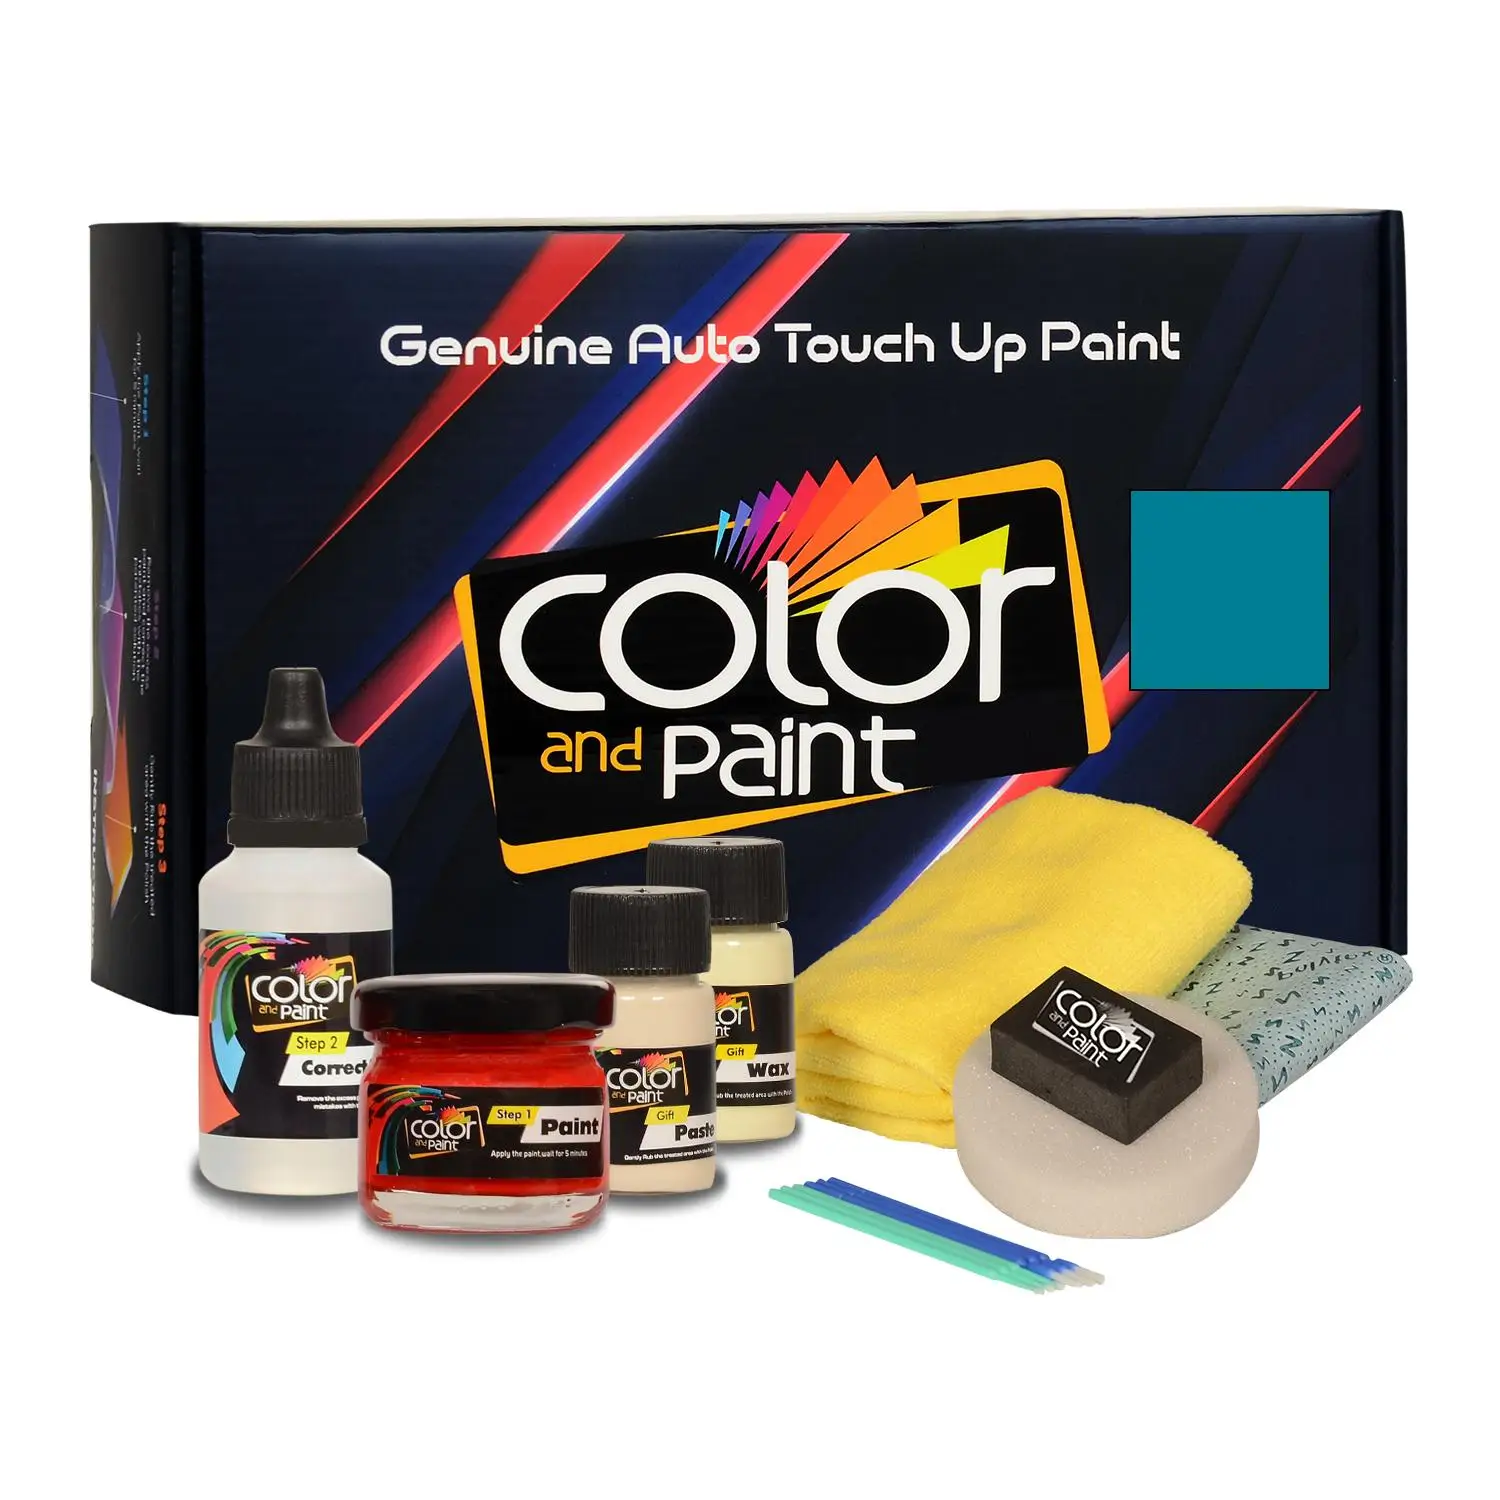 

Color and Paint compatible with Opel Automotive Touch Up Paint-OIL BLAU MET - GZ0 - Basic Care